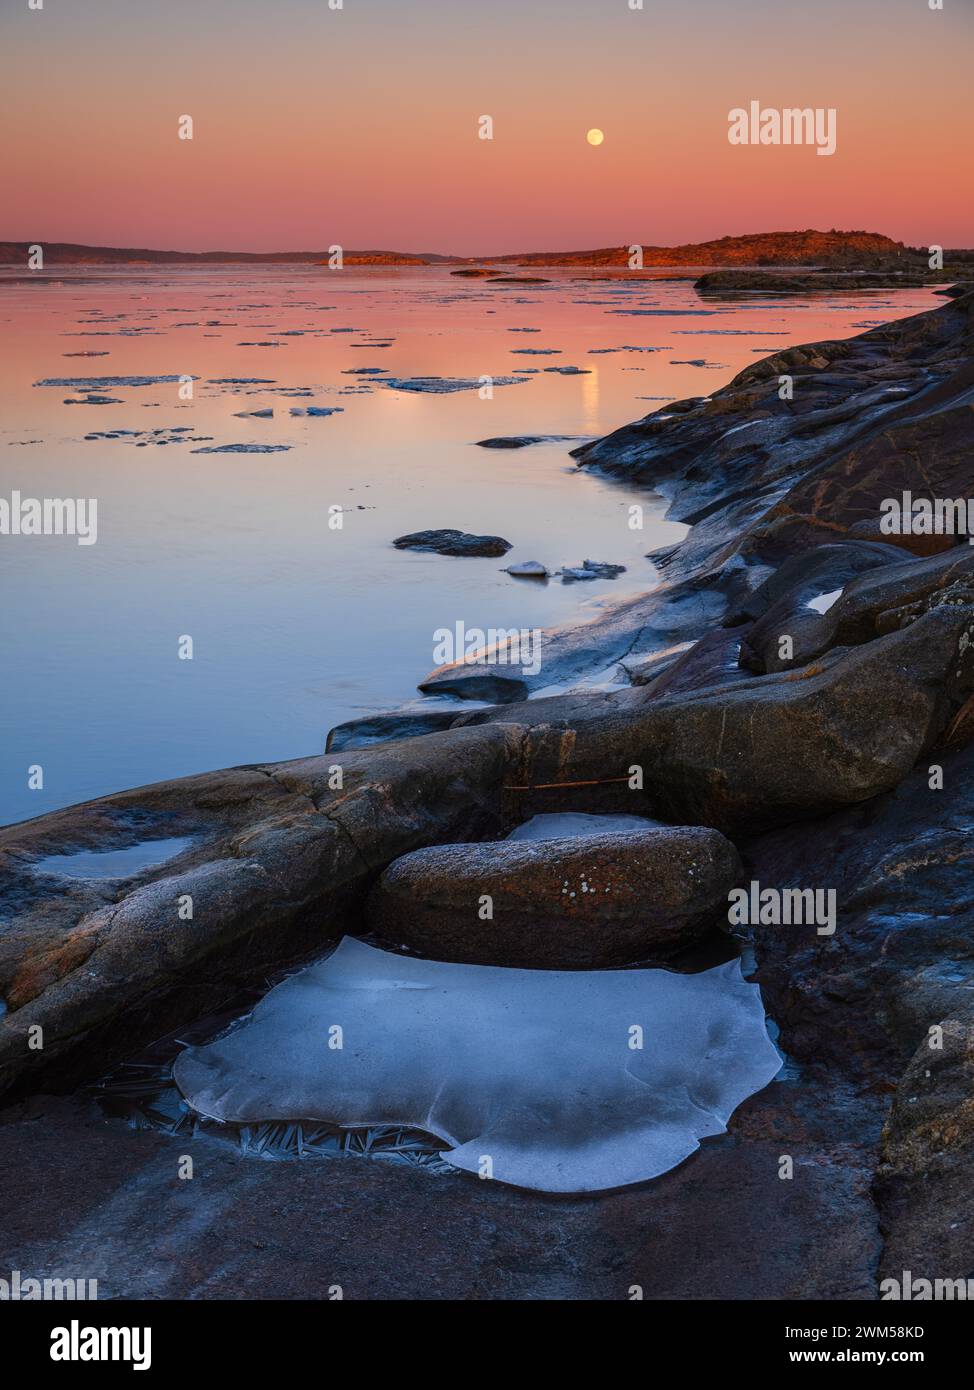 Frozen rocks are scattered across the beach as the sun sets in Sillvik, Sweden. The icy formations add a unique and stark element to the coastal lands Stock Photo